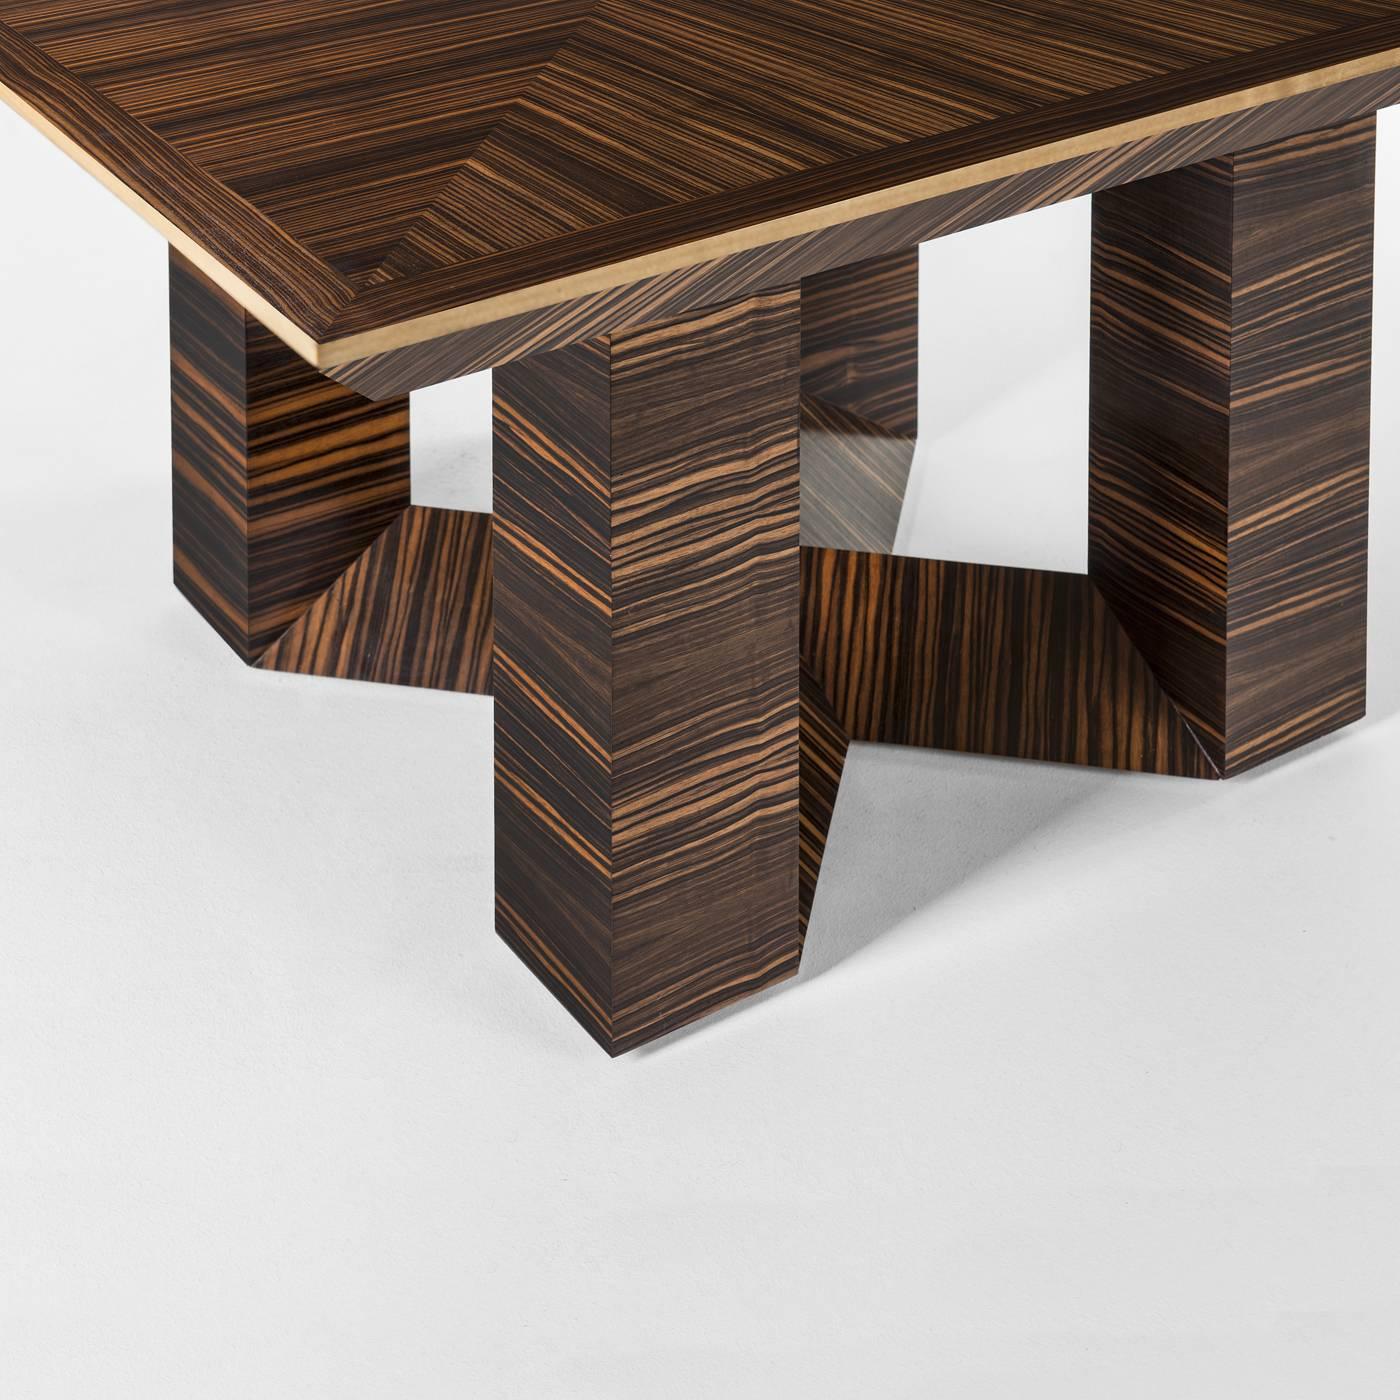 This table is in a unique octagon-shaped top which sits on top of a solid ebony macassar wood structure. The top features a pattern in the same wood, with the wood grain crossing, creating striking geometric shapes. The boarder of the table is in